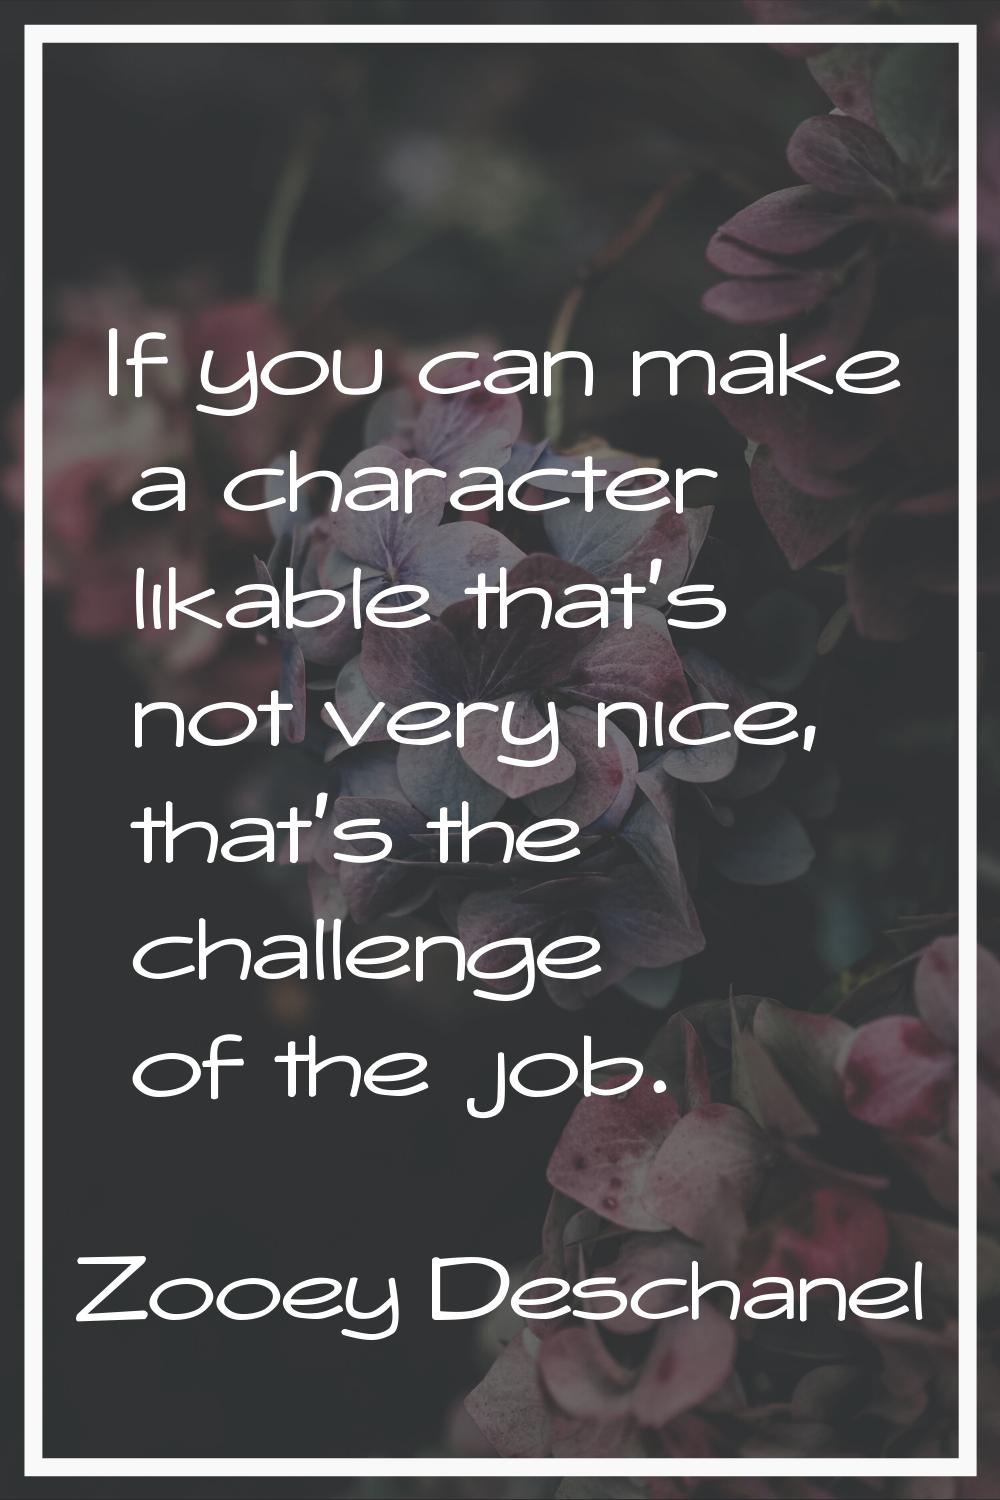 If you can make a character likable that's not very nice, that's the challenge of the job.